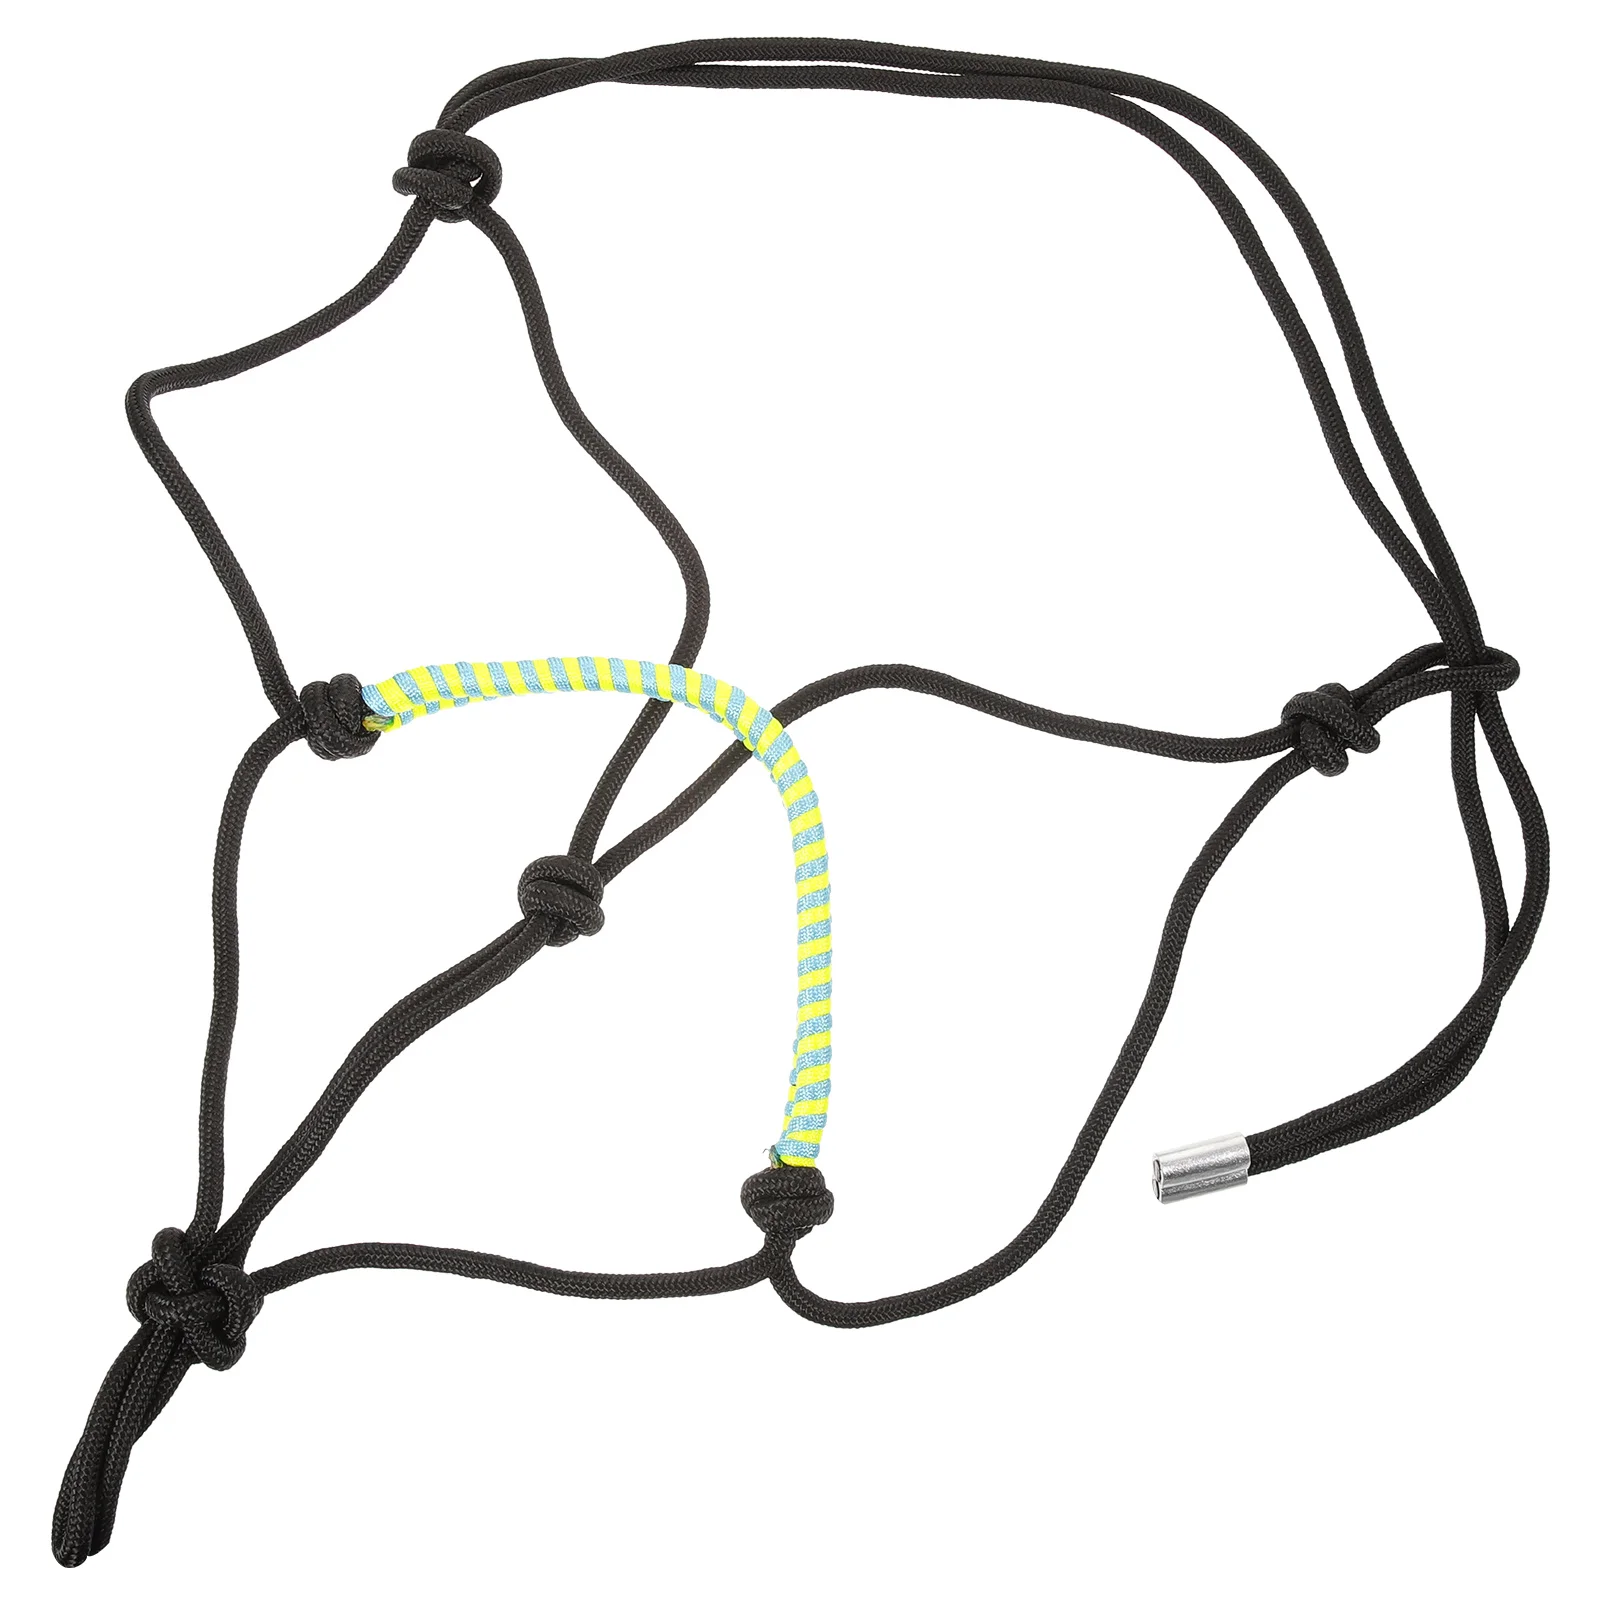 

Bridle Headstall Horse Supply Halter Bridles Horses Braided Rope The Halters Fully Equipment For